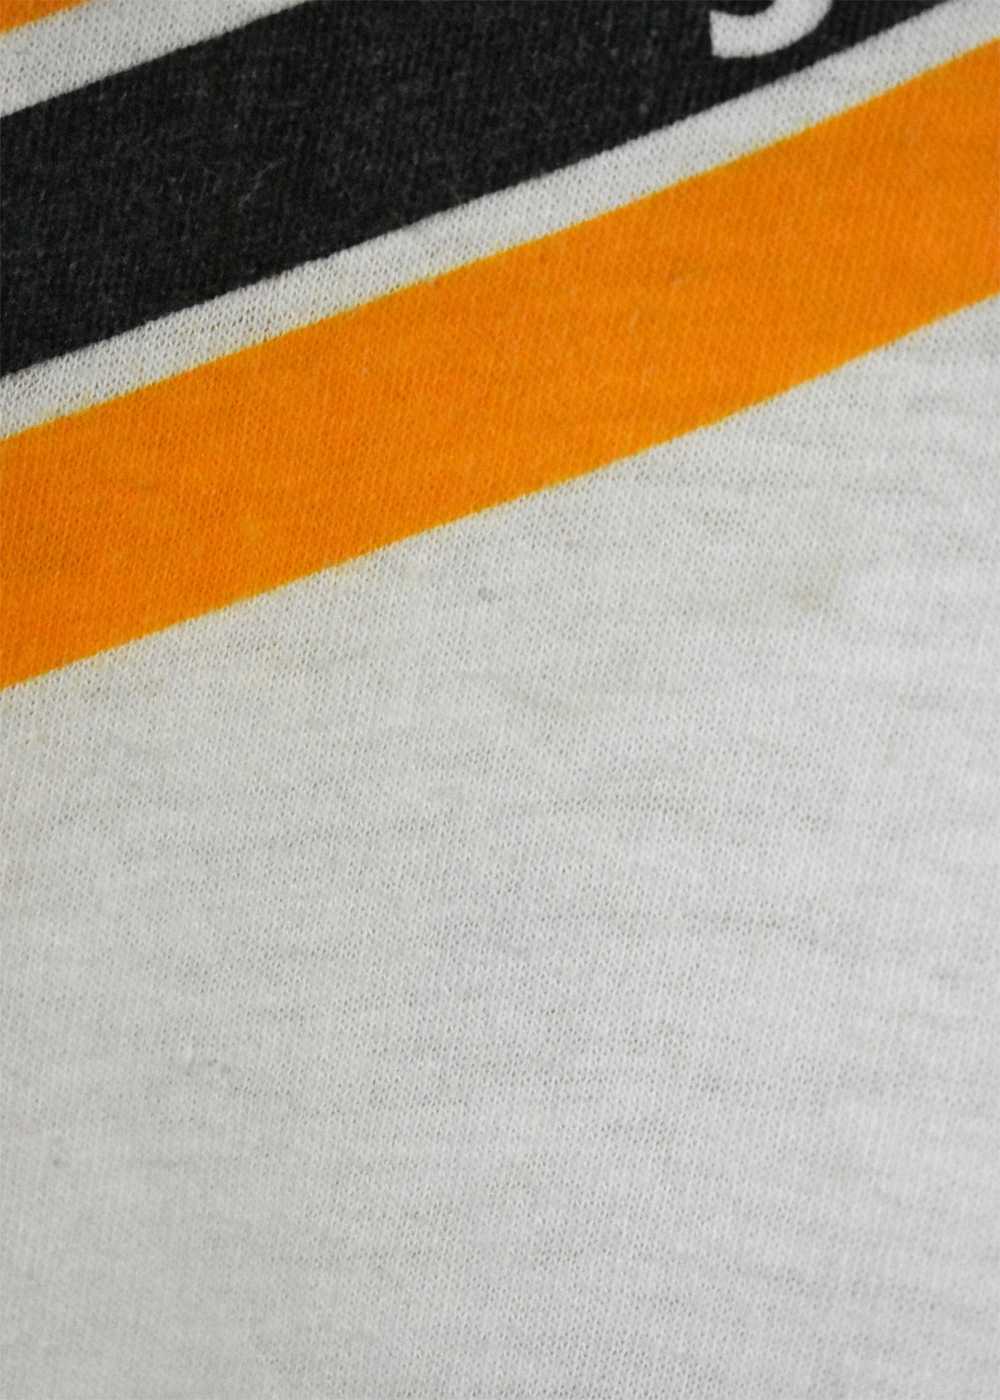 1970's Pittsburg Steelers Ringer T-shirt, Made in… - image 4